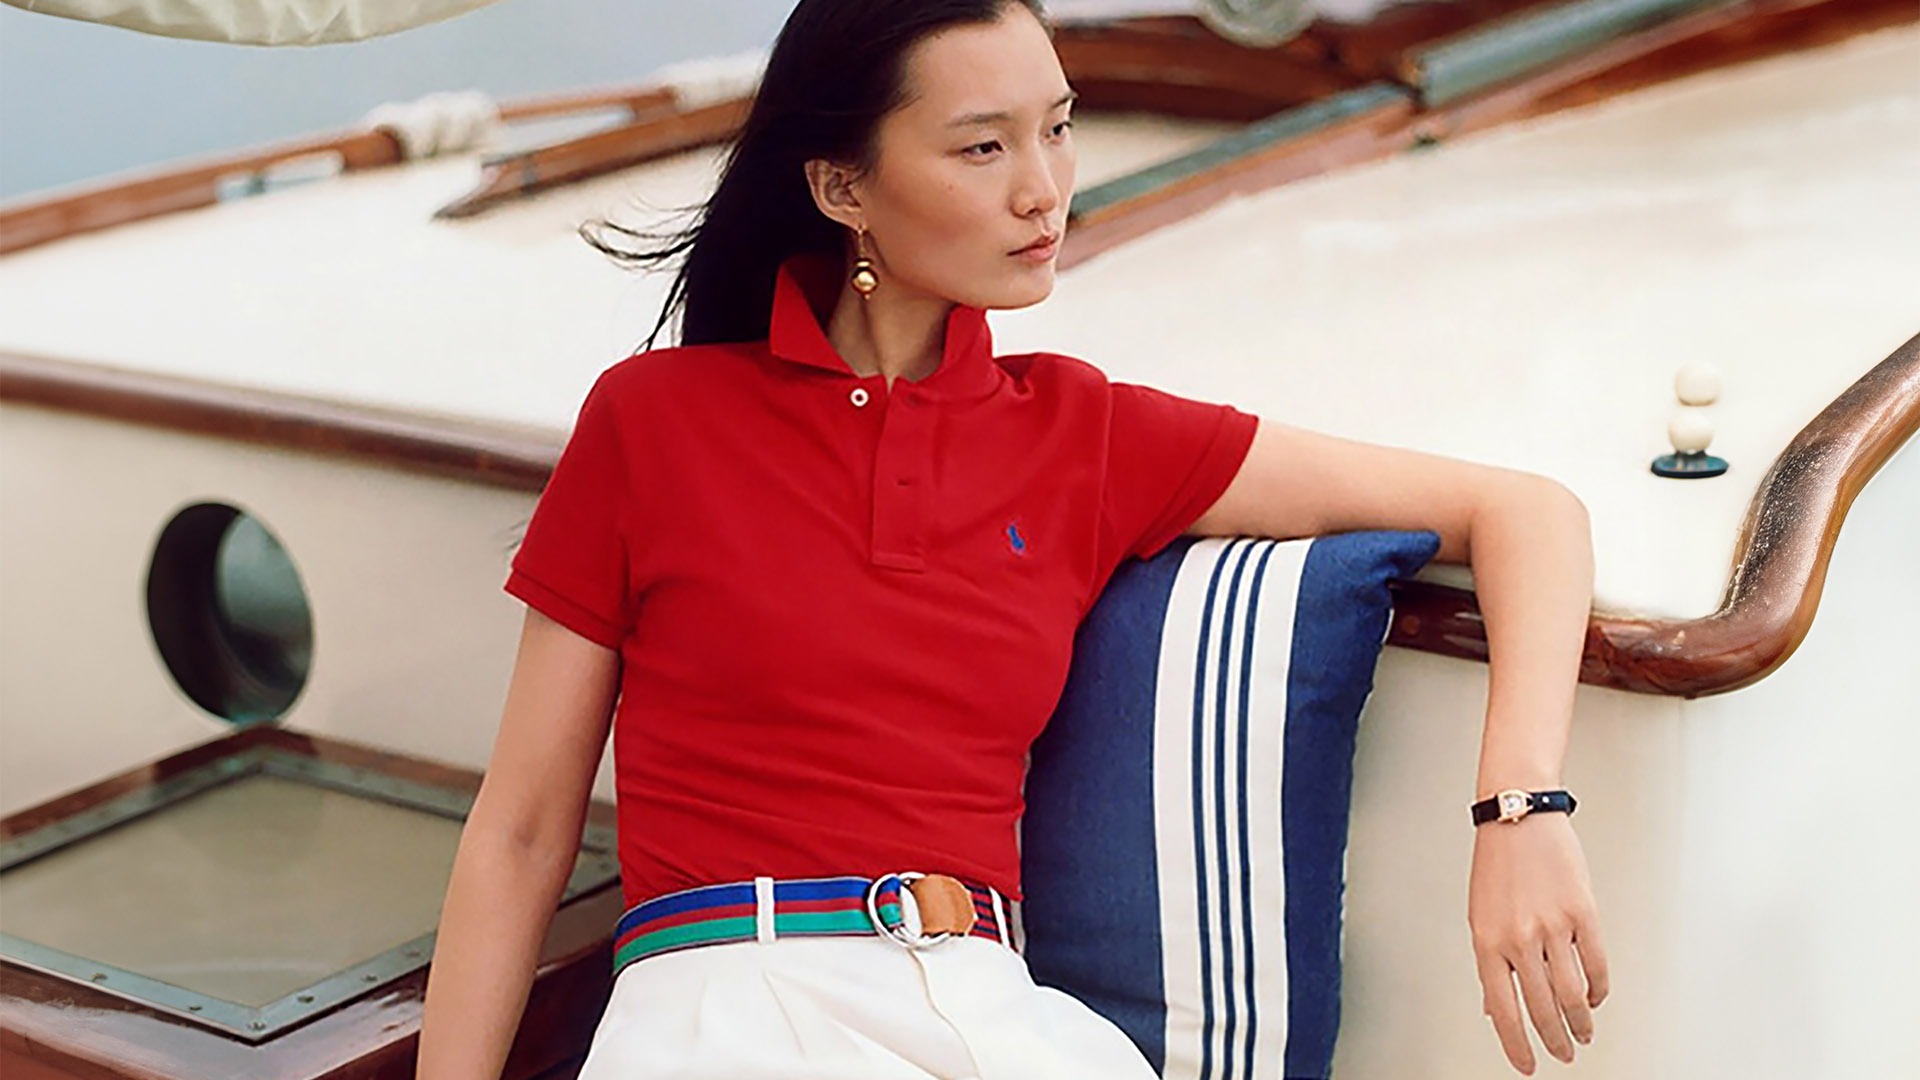 mirabelle bay asian woman on sailboat wearing red polo shirt and white pants horizontal